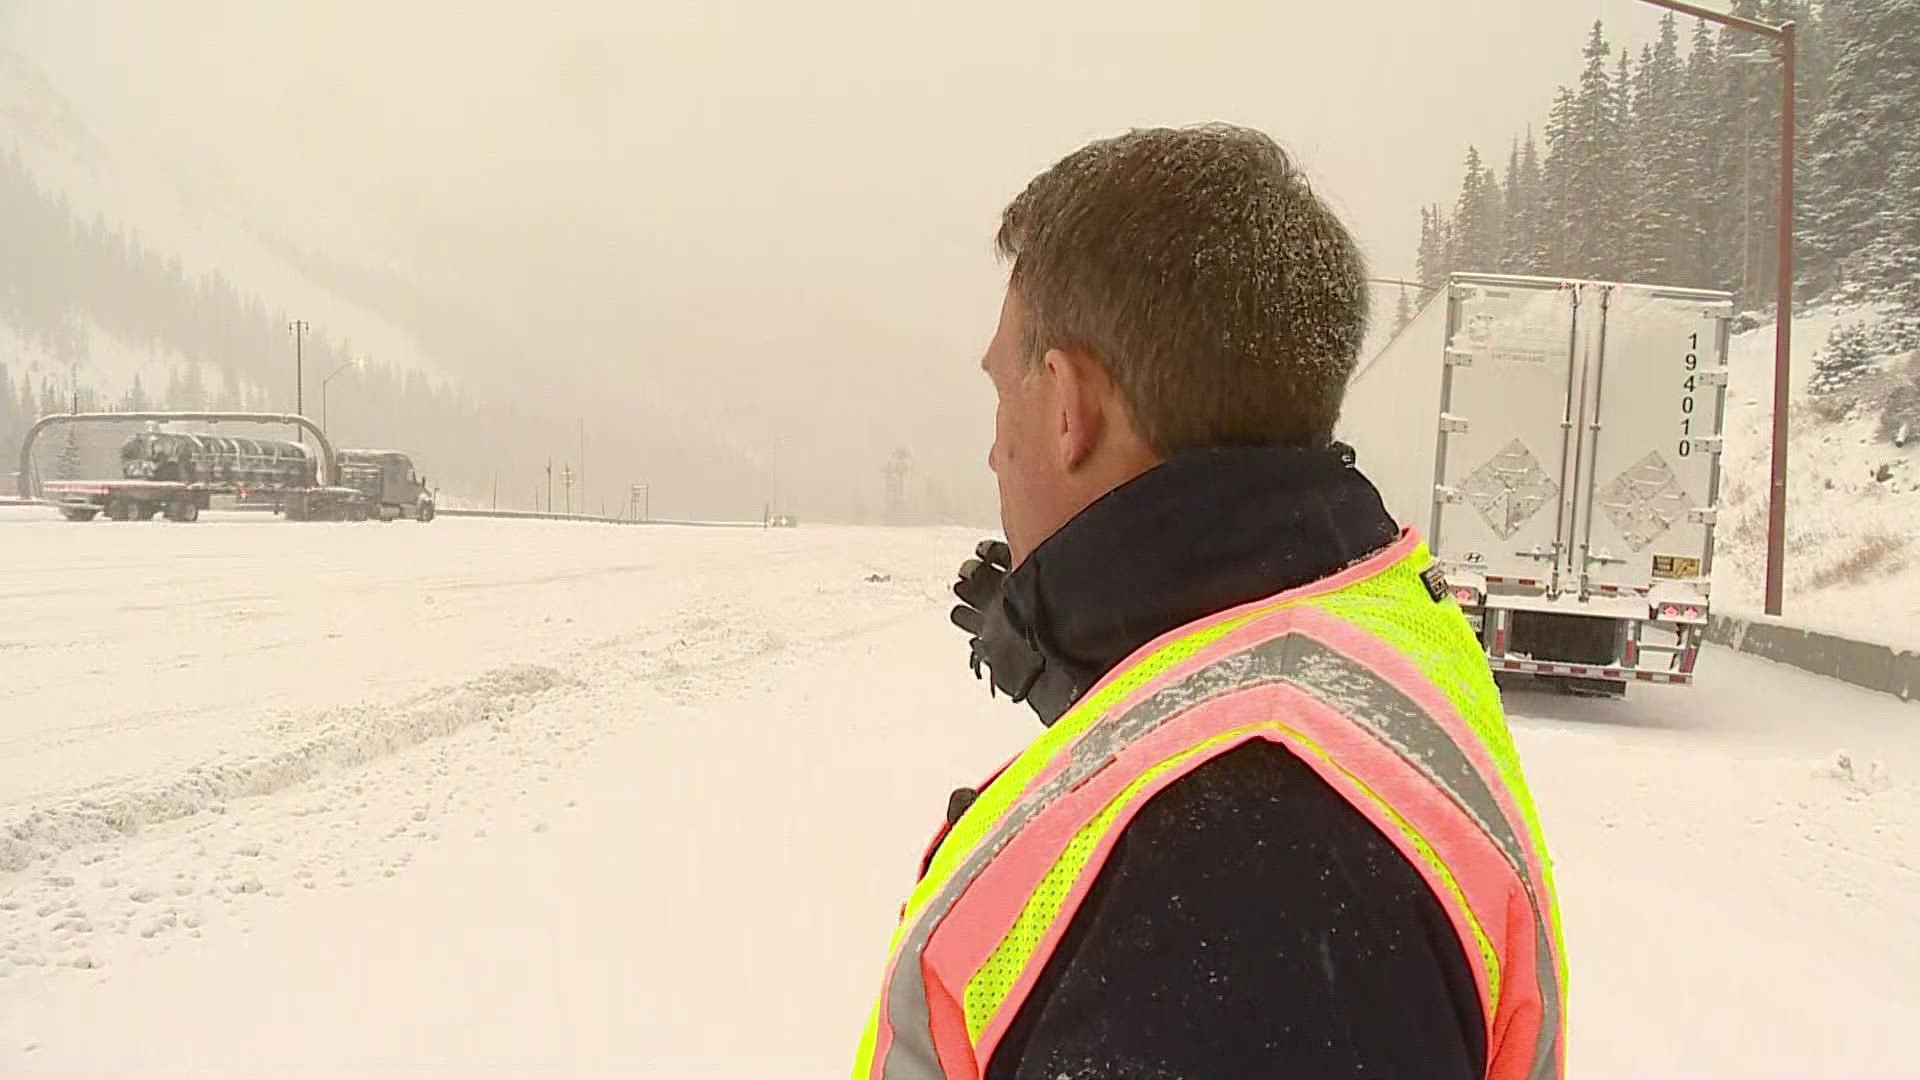 Matt Renoux is checking out the snowy conditions near the Eisenhower-Johnson Memorial Tunnels along I-70, where about 6 inches of fresh snow has fallen so far.